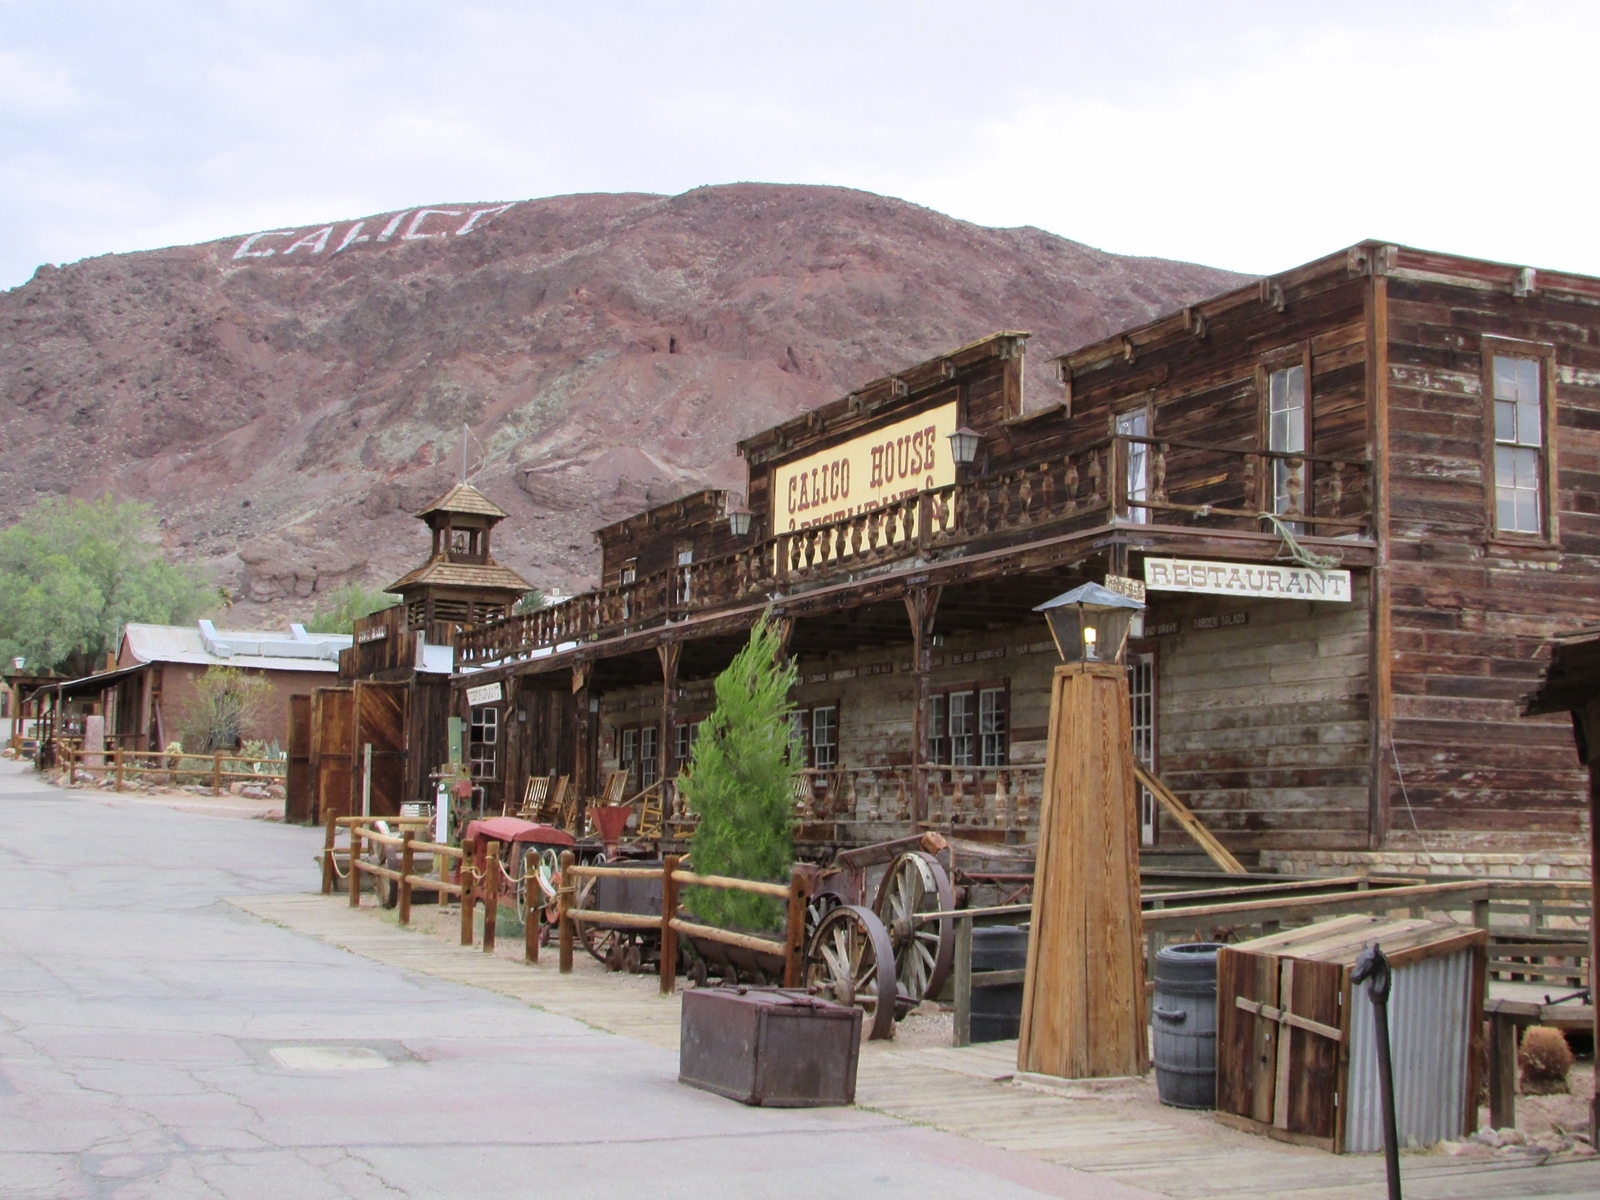 Calico Ghost town - usa rundreise - geisterstadt in der Mojave Wüste - Eingang - Calico House - Fashionladyloves by Tamara Wagner Travelblog